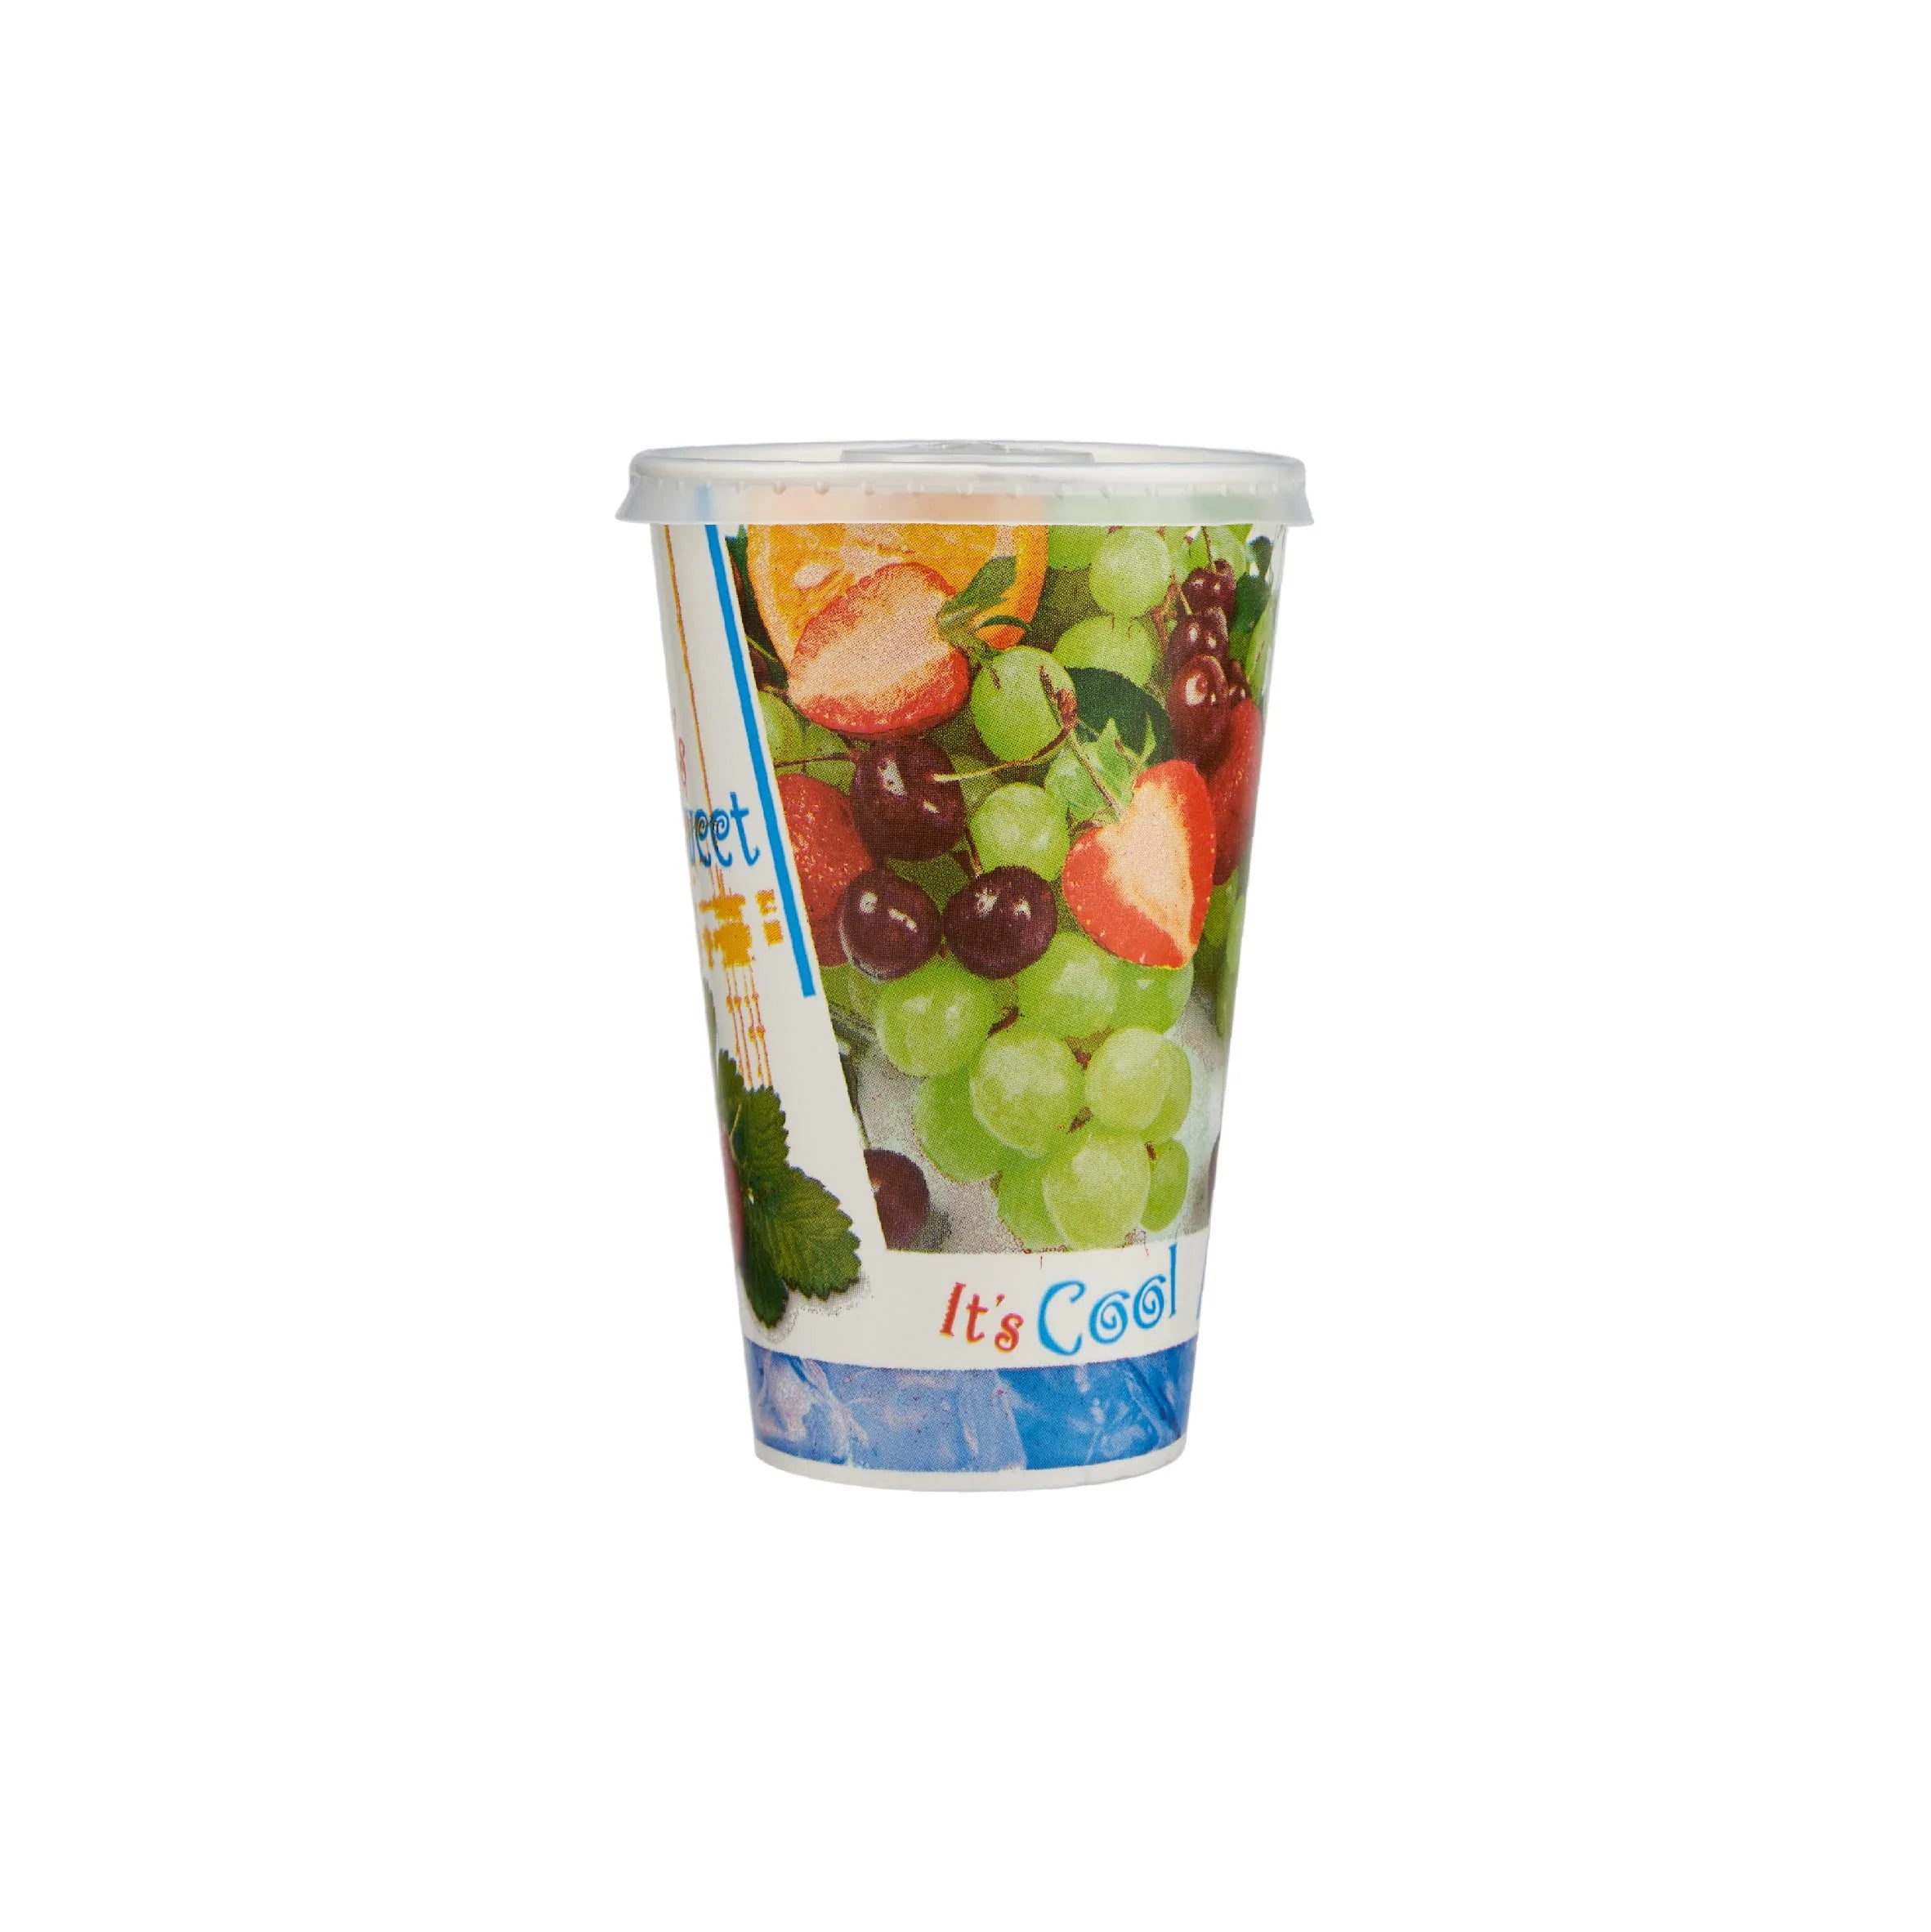 Paper Juice Cup With Lid, 16 Oz (470 ml)| 1000 Pieces - Hotpack 